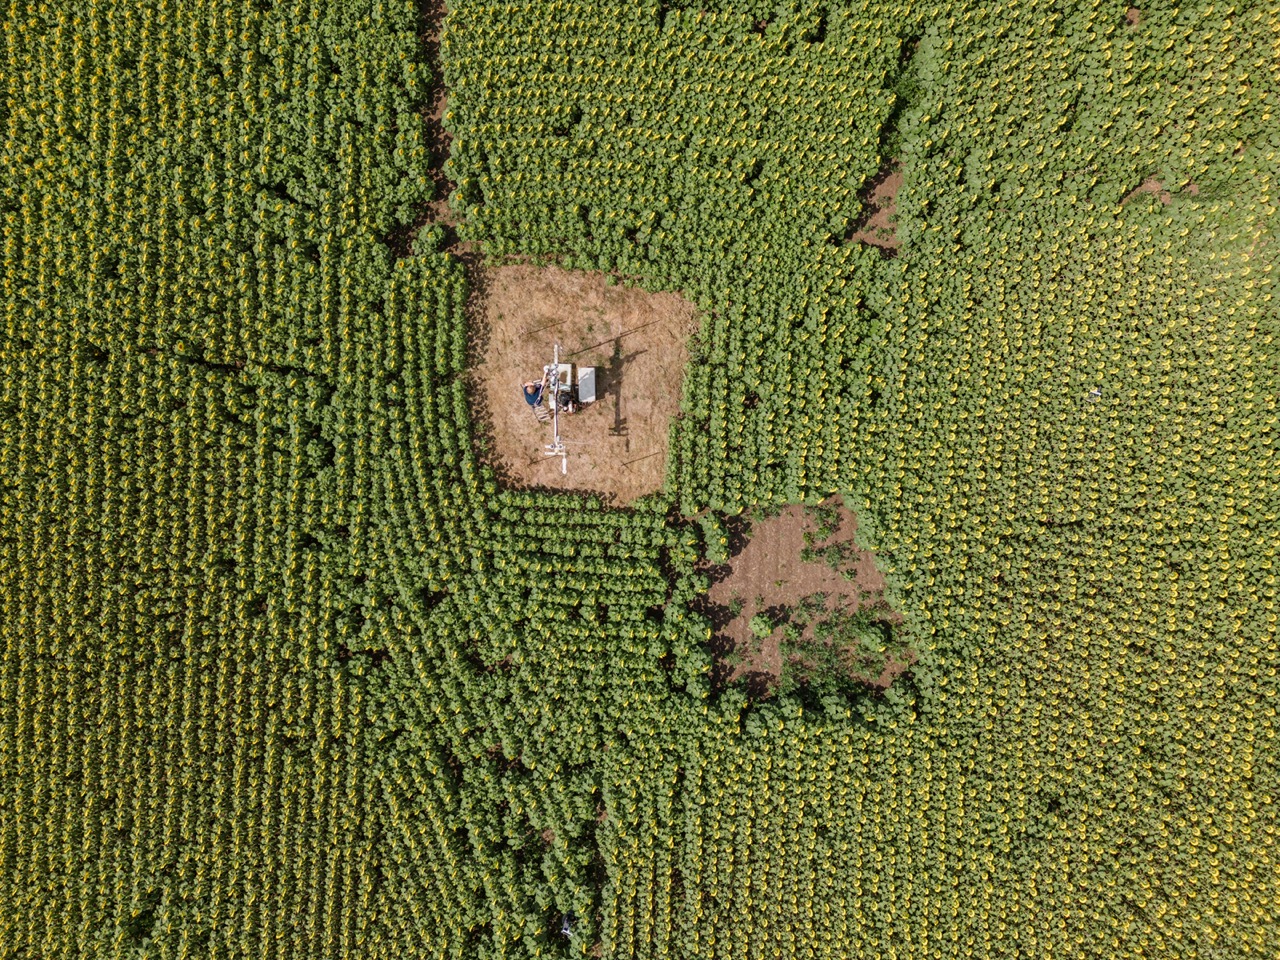 picture of the sunflower field from above